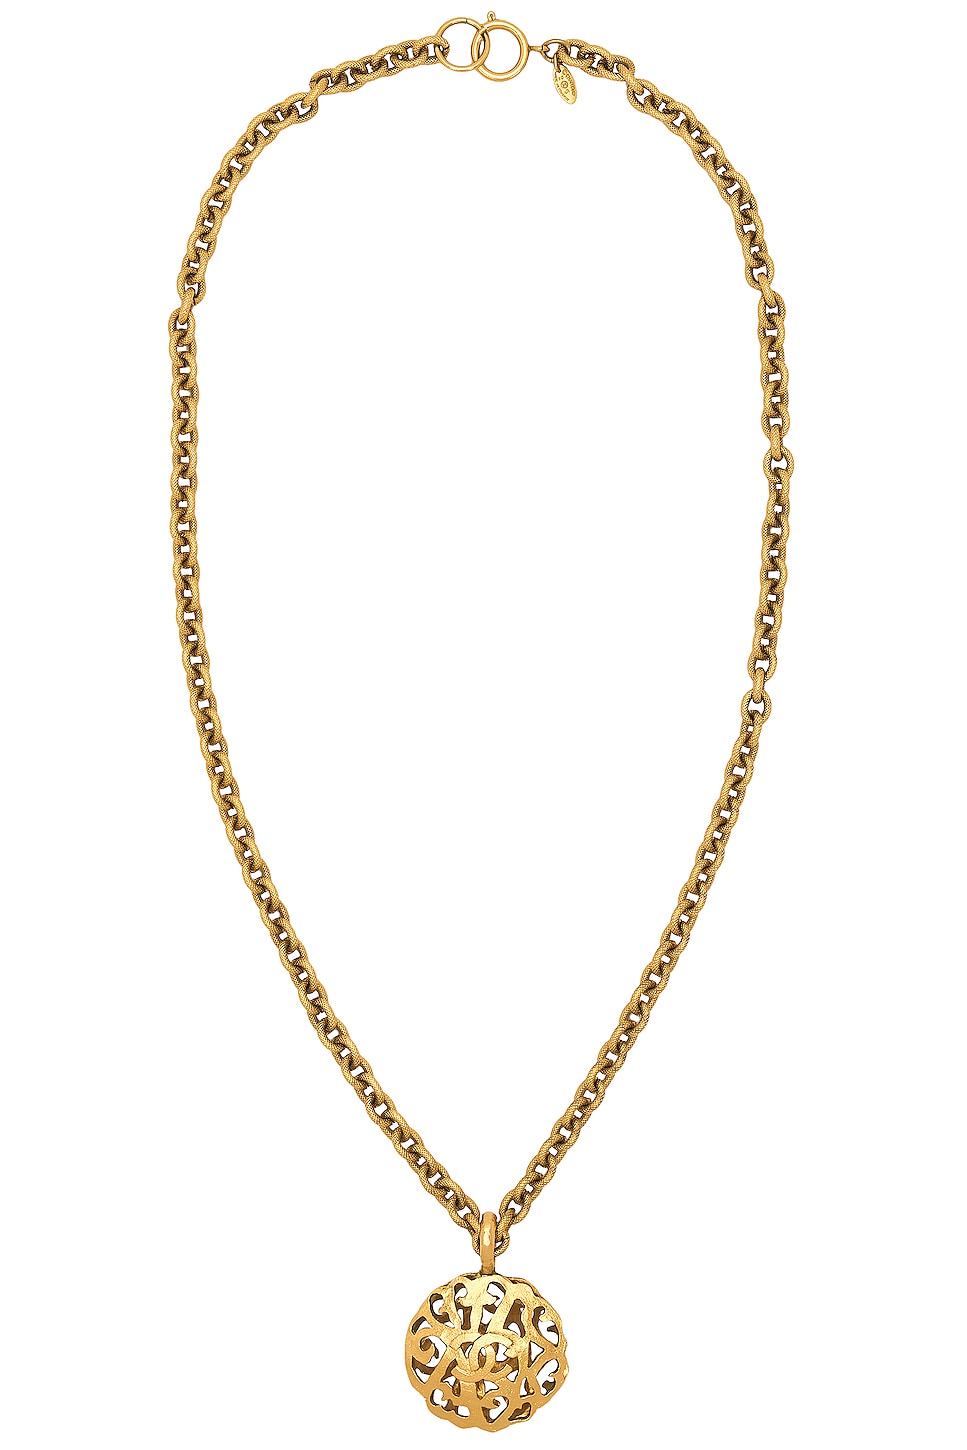 Image 1 of FWRD Renew Chanel Coco Mark Pendant Chain Necklace in Gold